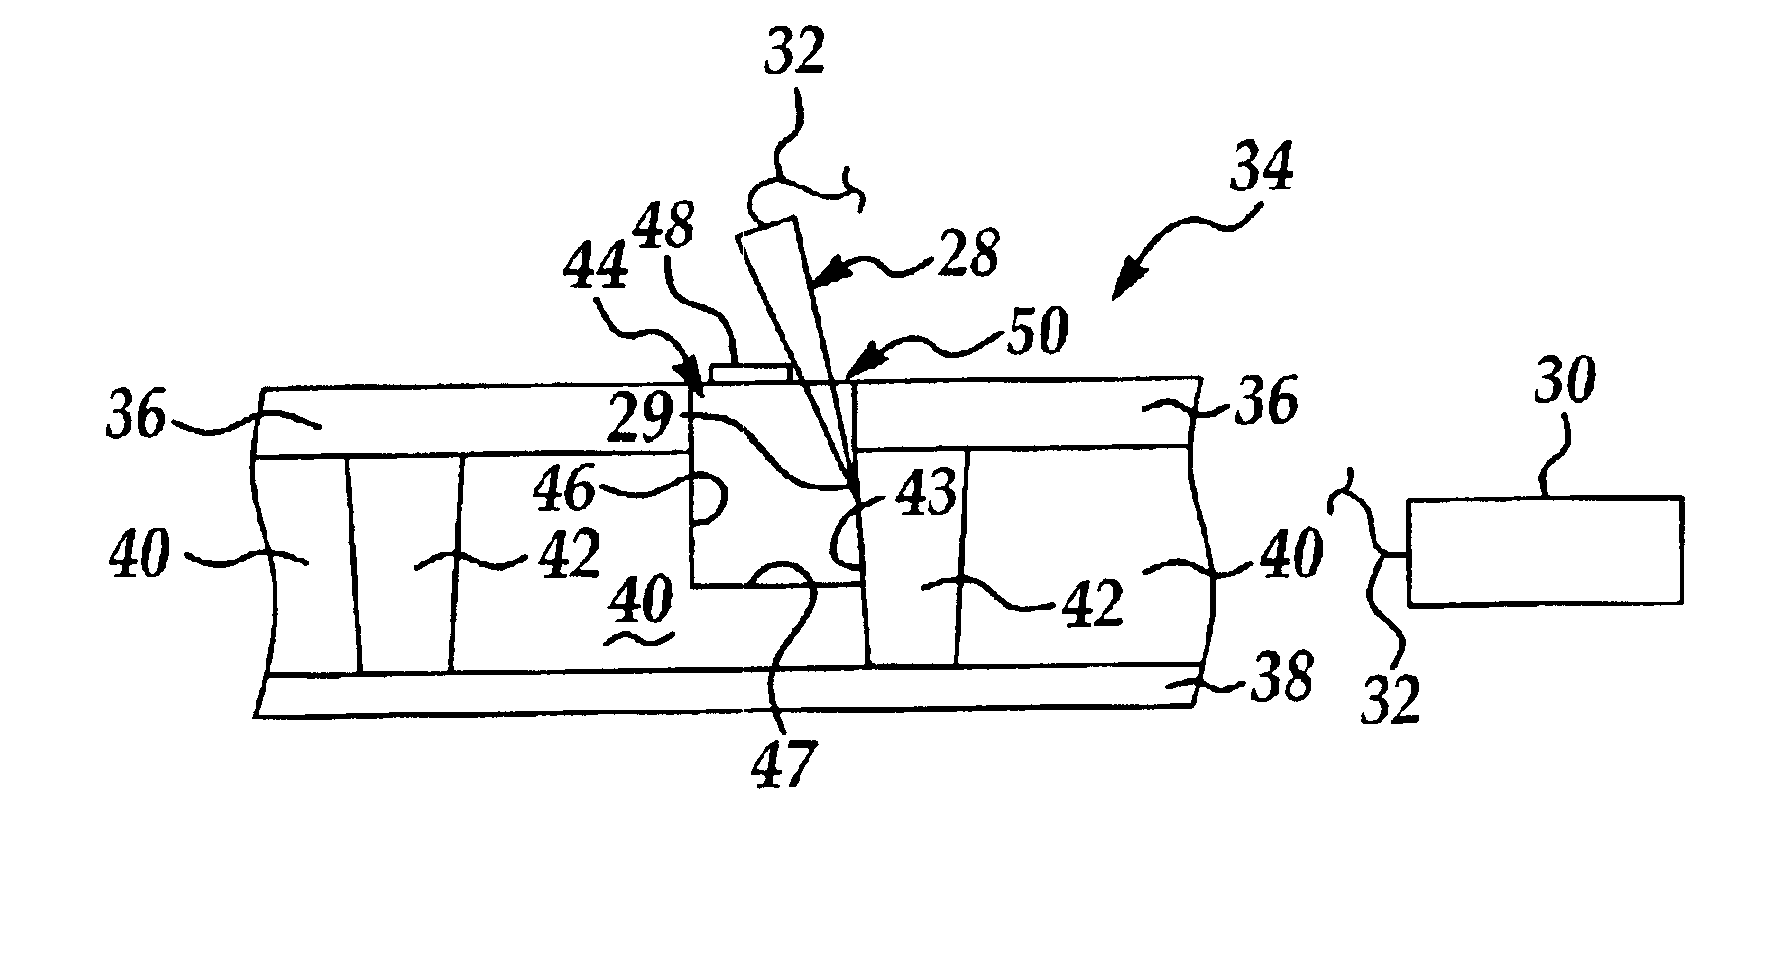 Probing of device elements